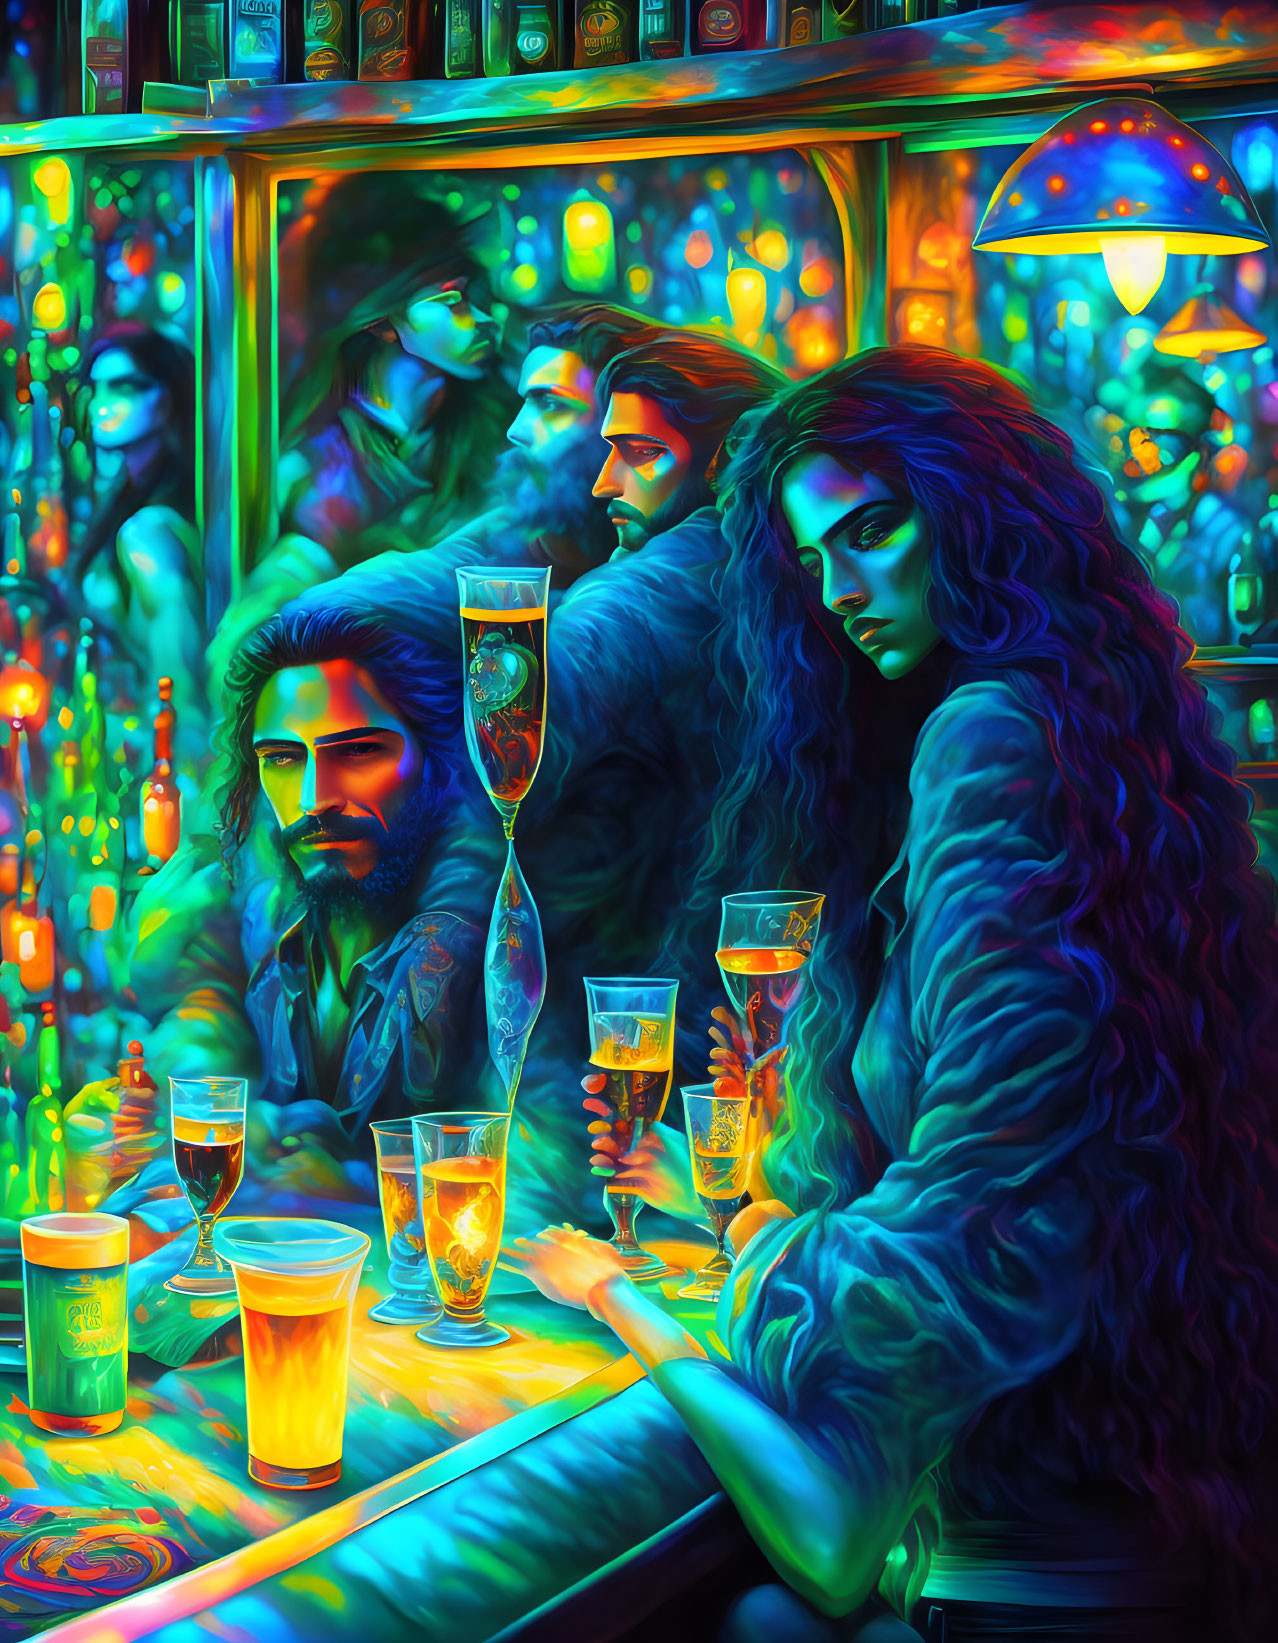 Colorful artwork: people in bar, neon lights, intense gazes, surreal vibe